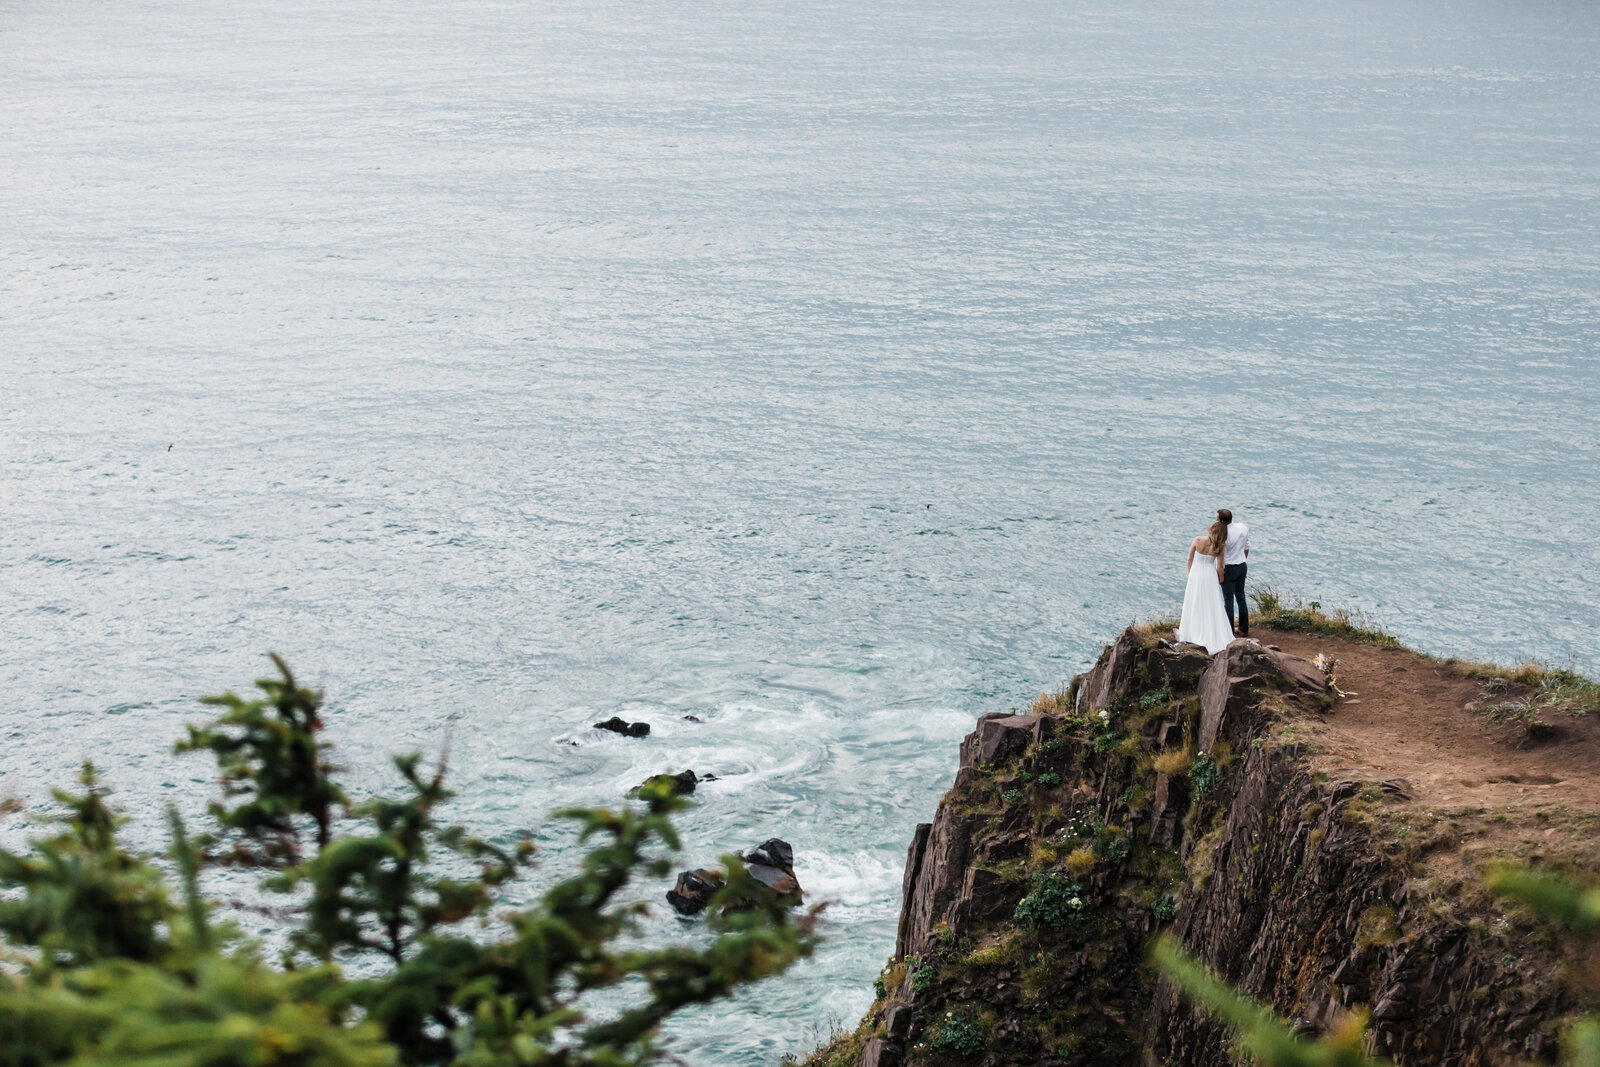 A blonde bride wearing a strapless gown holds her groom's hand and rests her head on his shoulder as they gaze out at the Pacific Ocean while standing on the cliff edge after saying their vows at their Oregon Coast adventure elopement near Manzanita. | Erica Swantek Photography